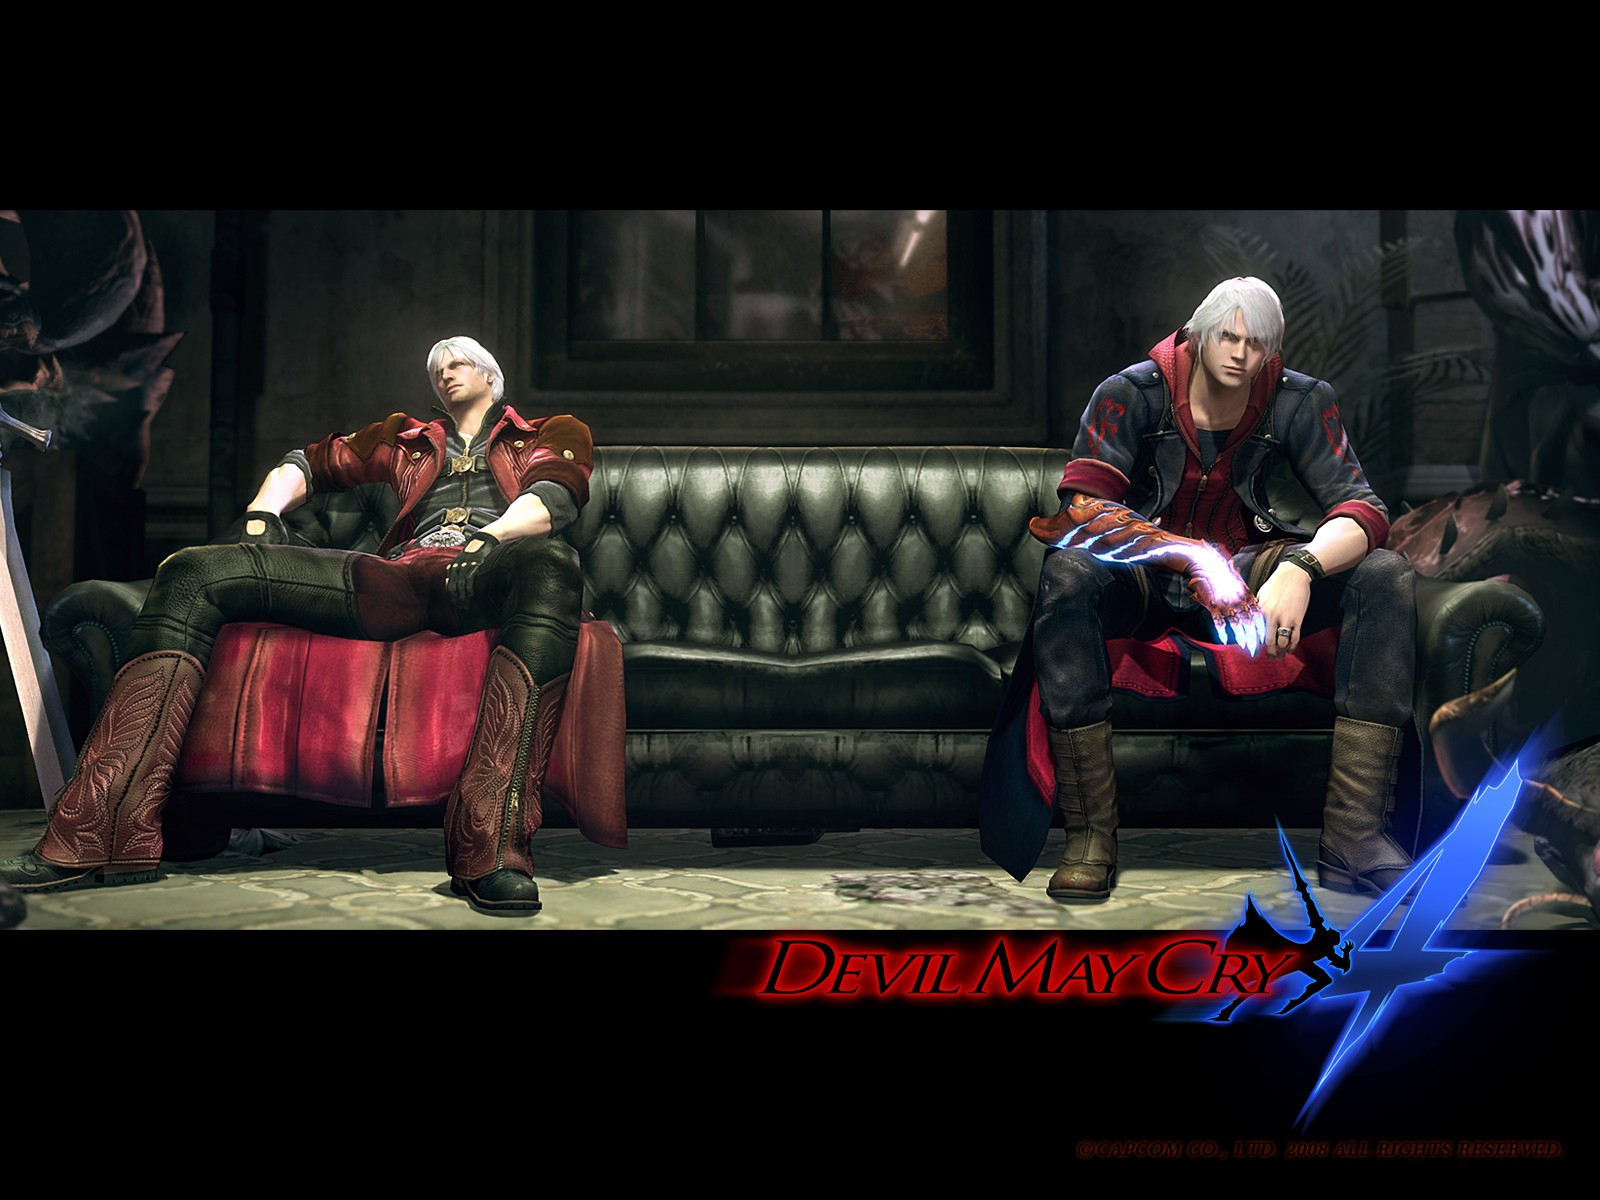  TO7cy8woCo8s1600devil may cry 4 wallpaper wp20080222 3jpg 1600x1200